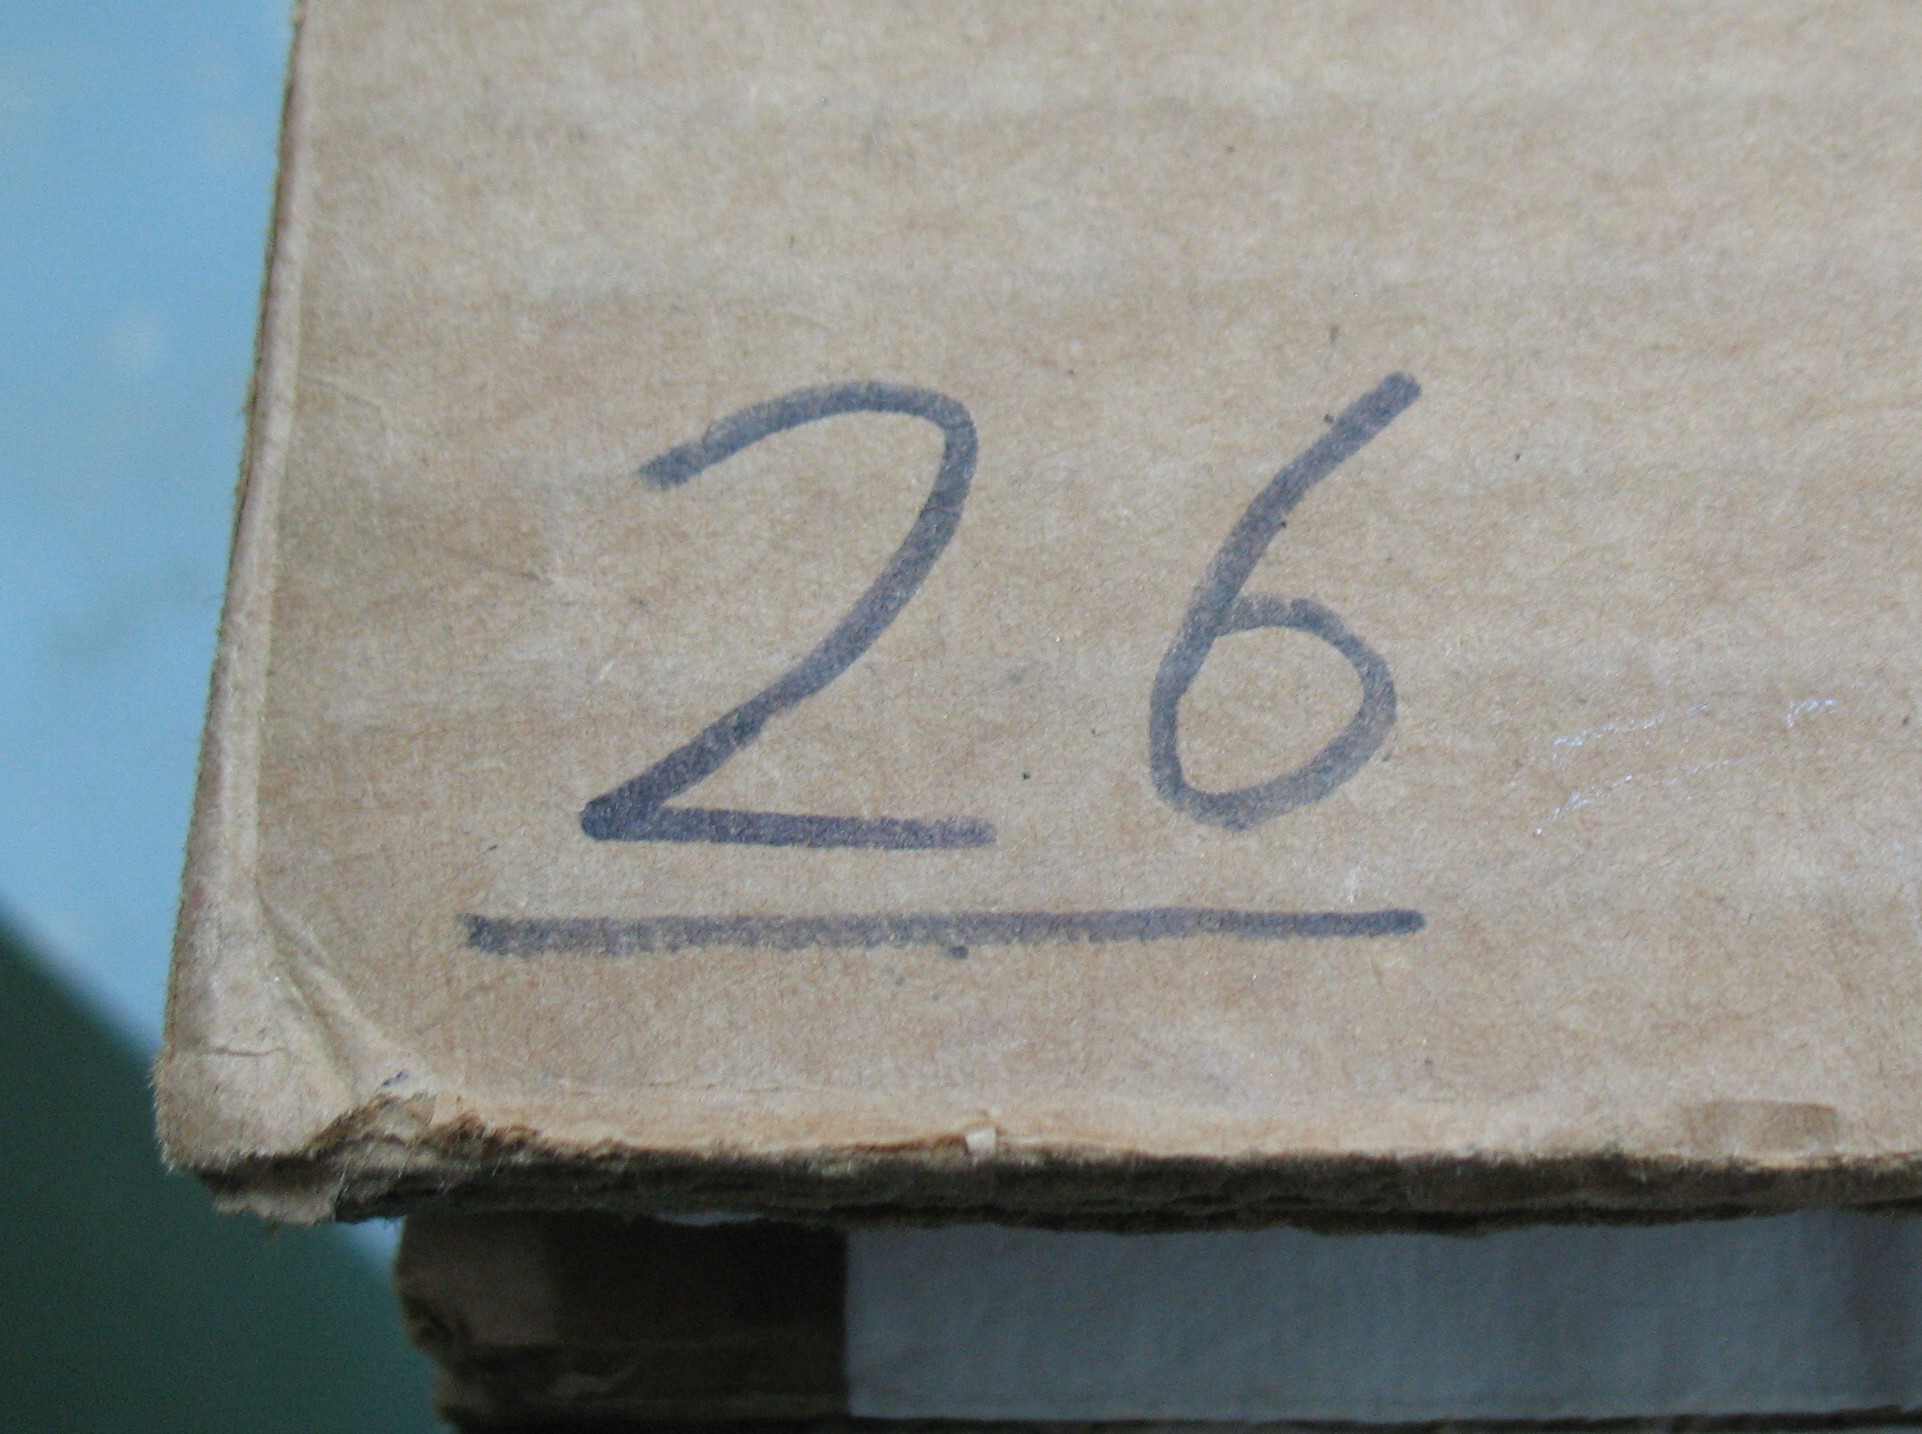 Numbering the cardboard sheets helps track which sheets belong to whom in a group workshop.